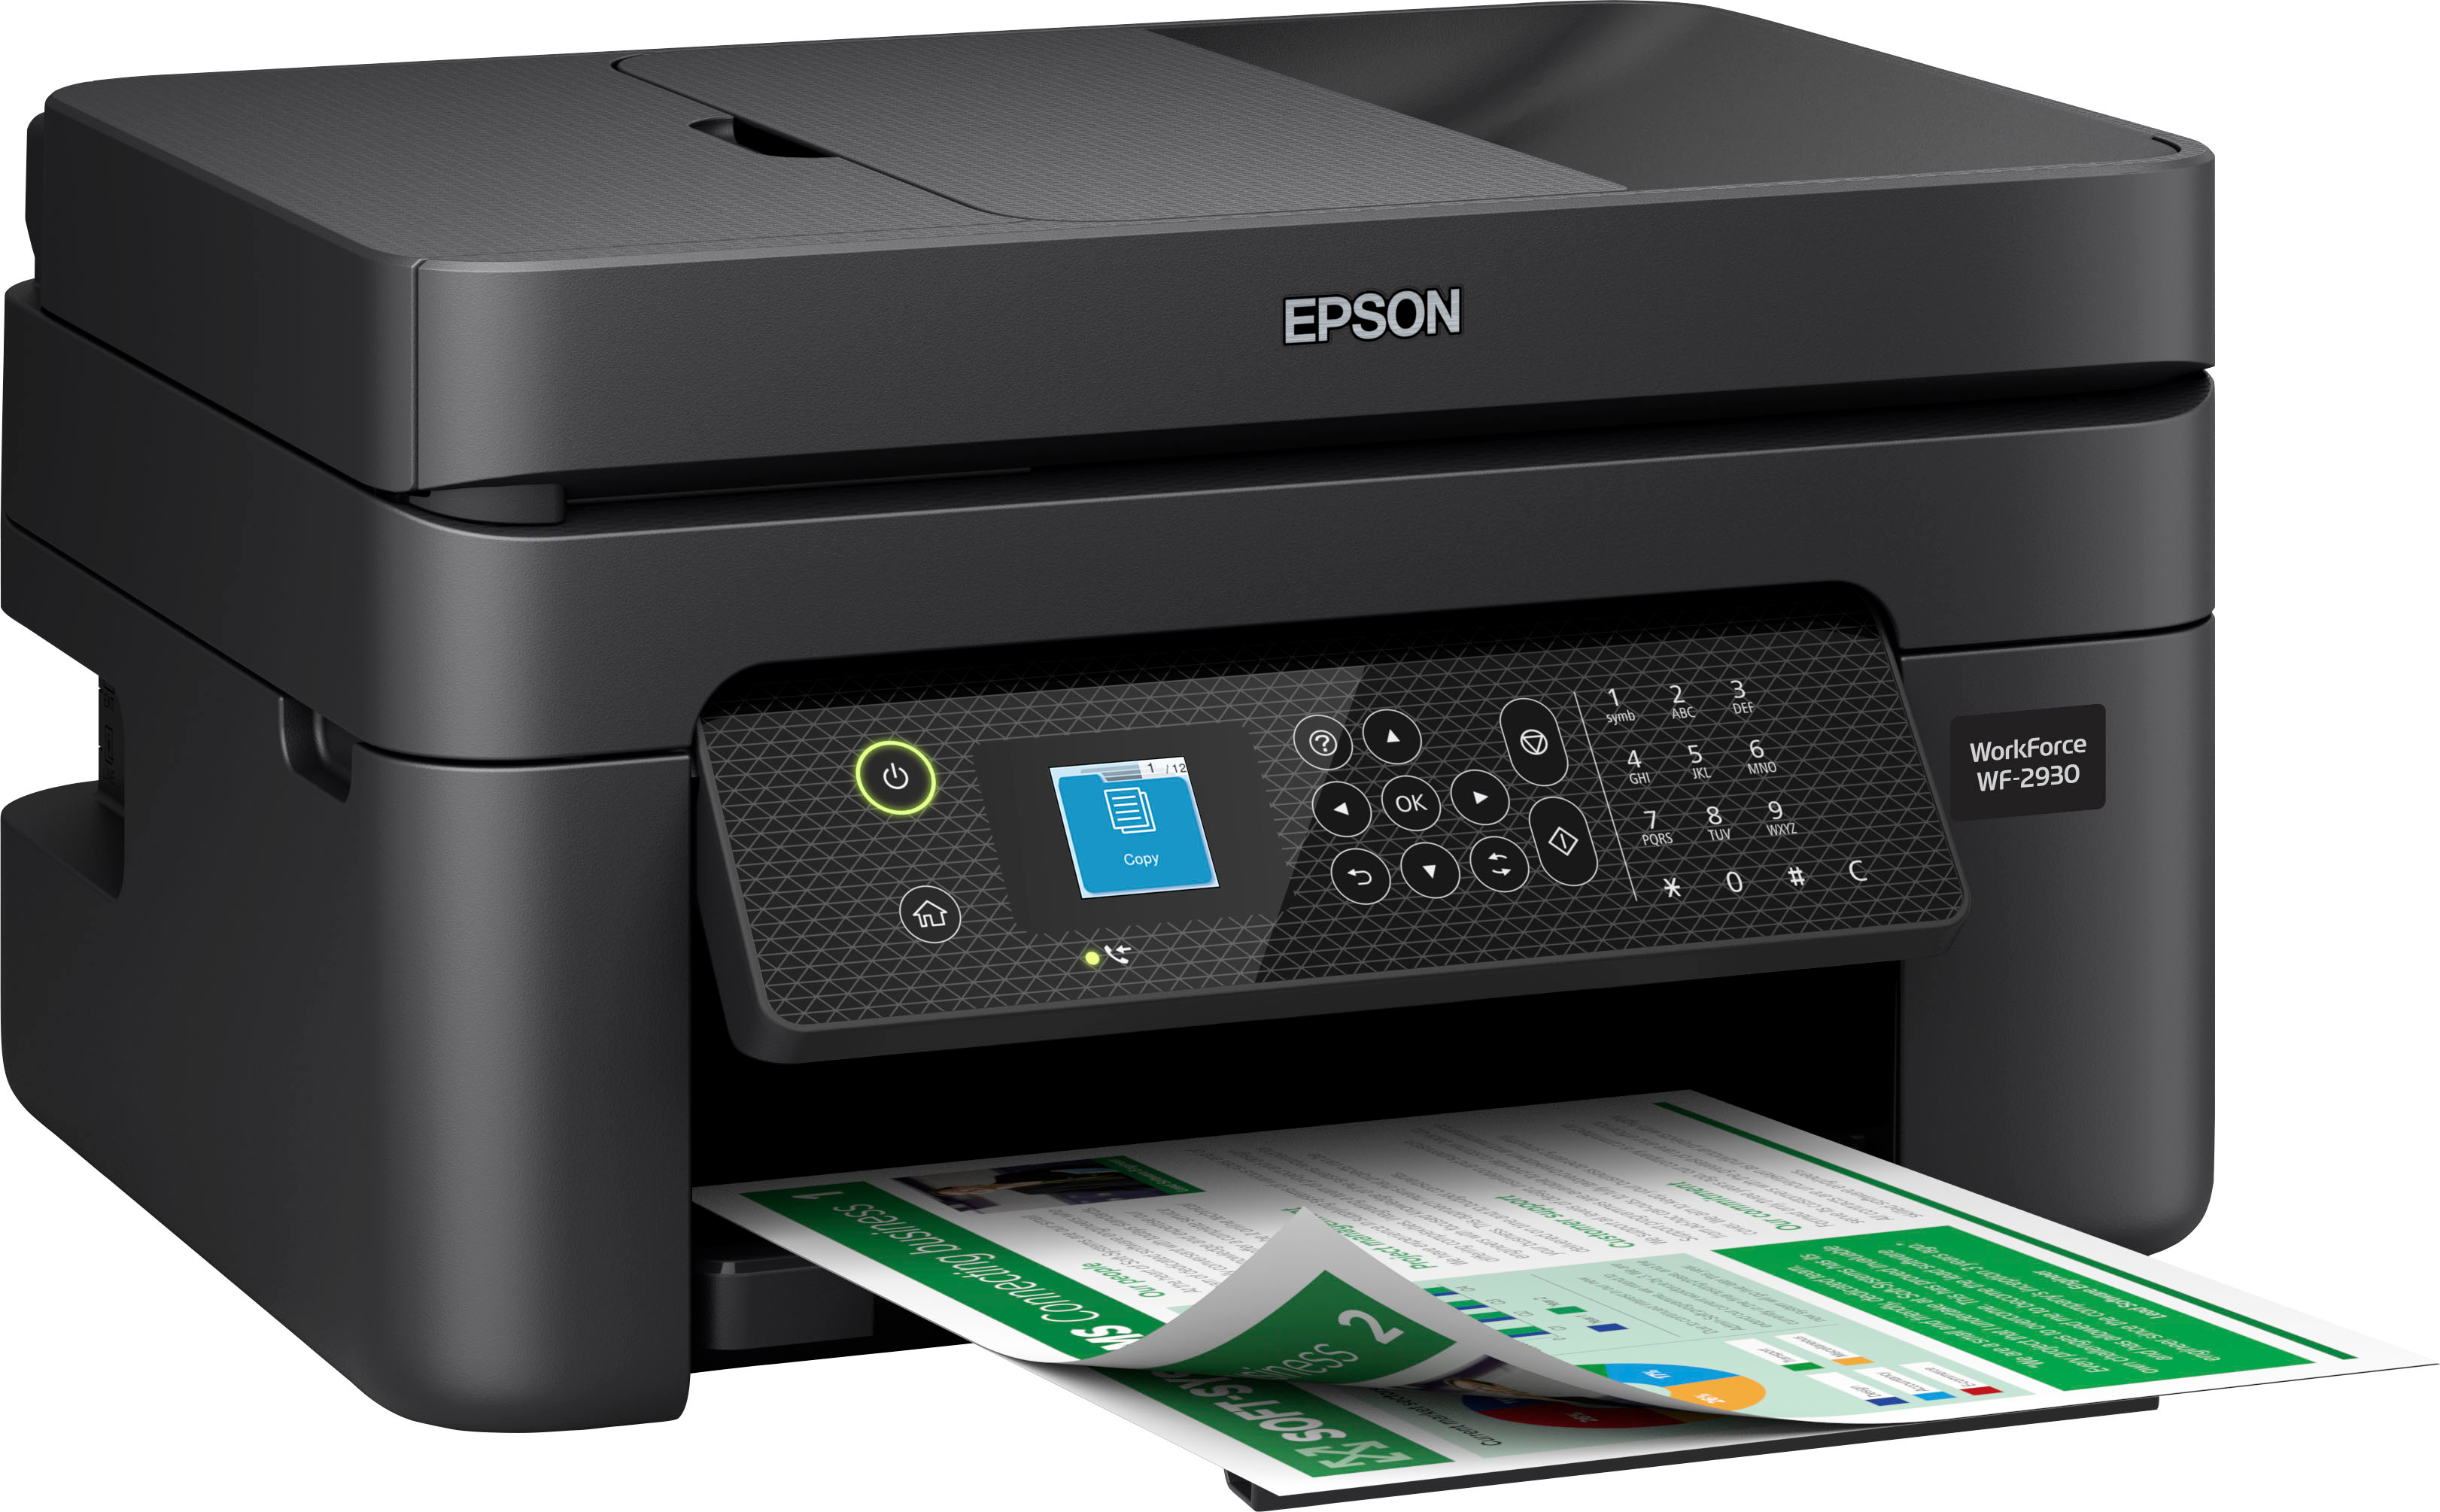 Angle View: Epson - WorkForce WF-2930 All-in-One Inkjet Printer